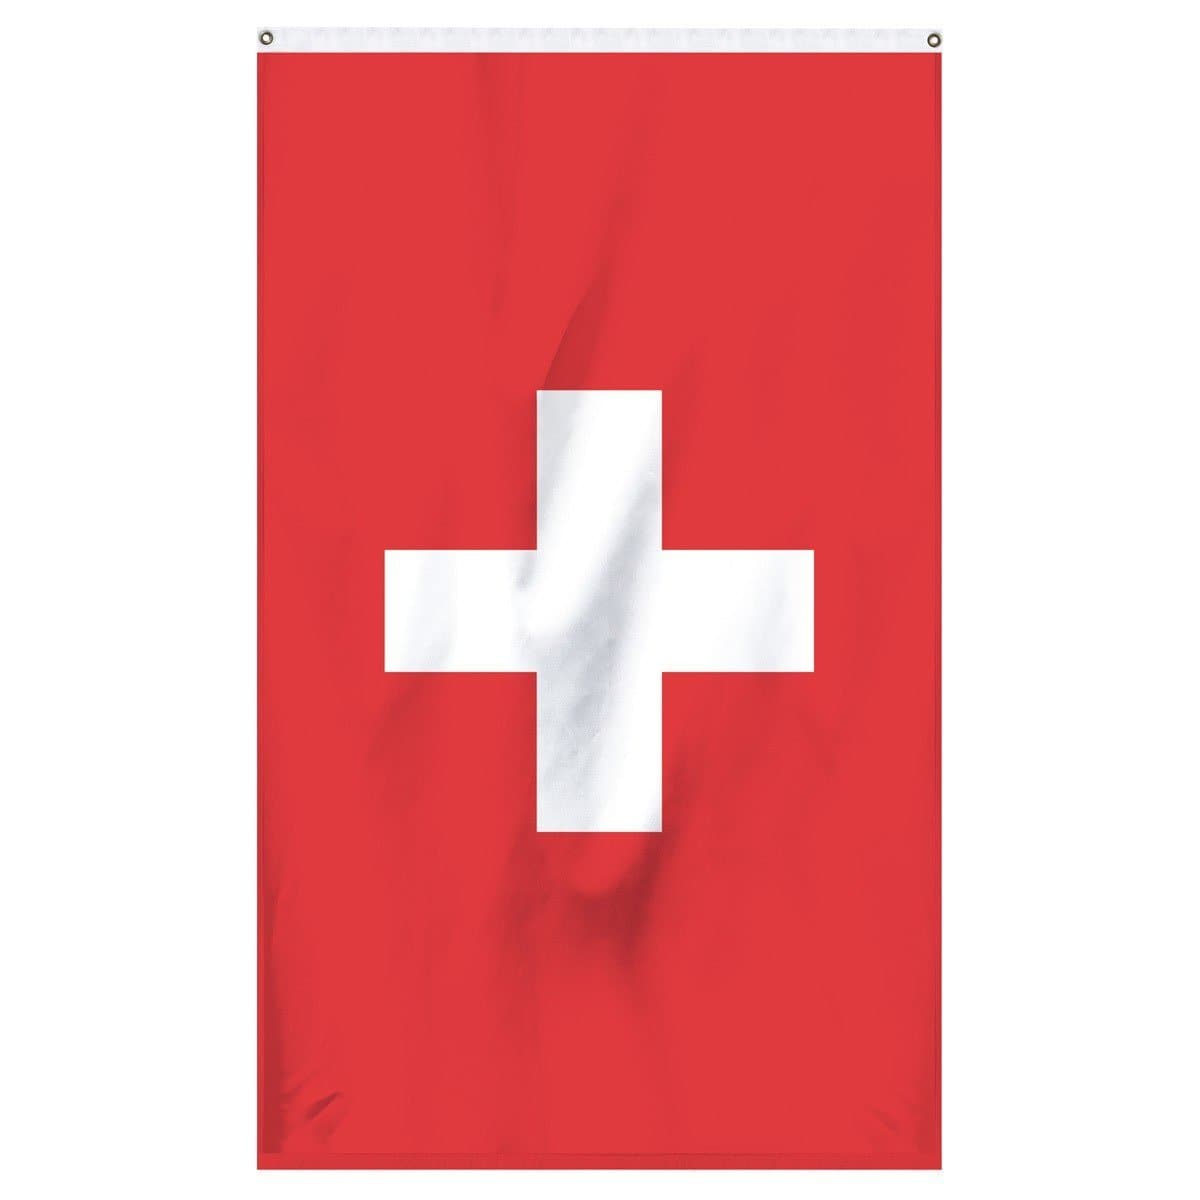 Switzerland National flag for sale to buy online from Atlantic Flag and Pole. Red flag with a white cross.